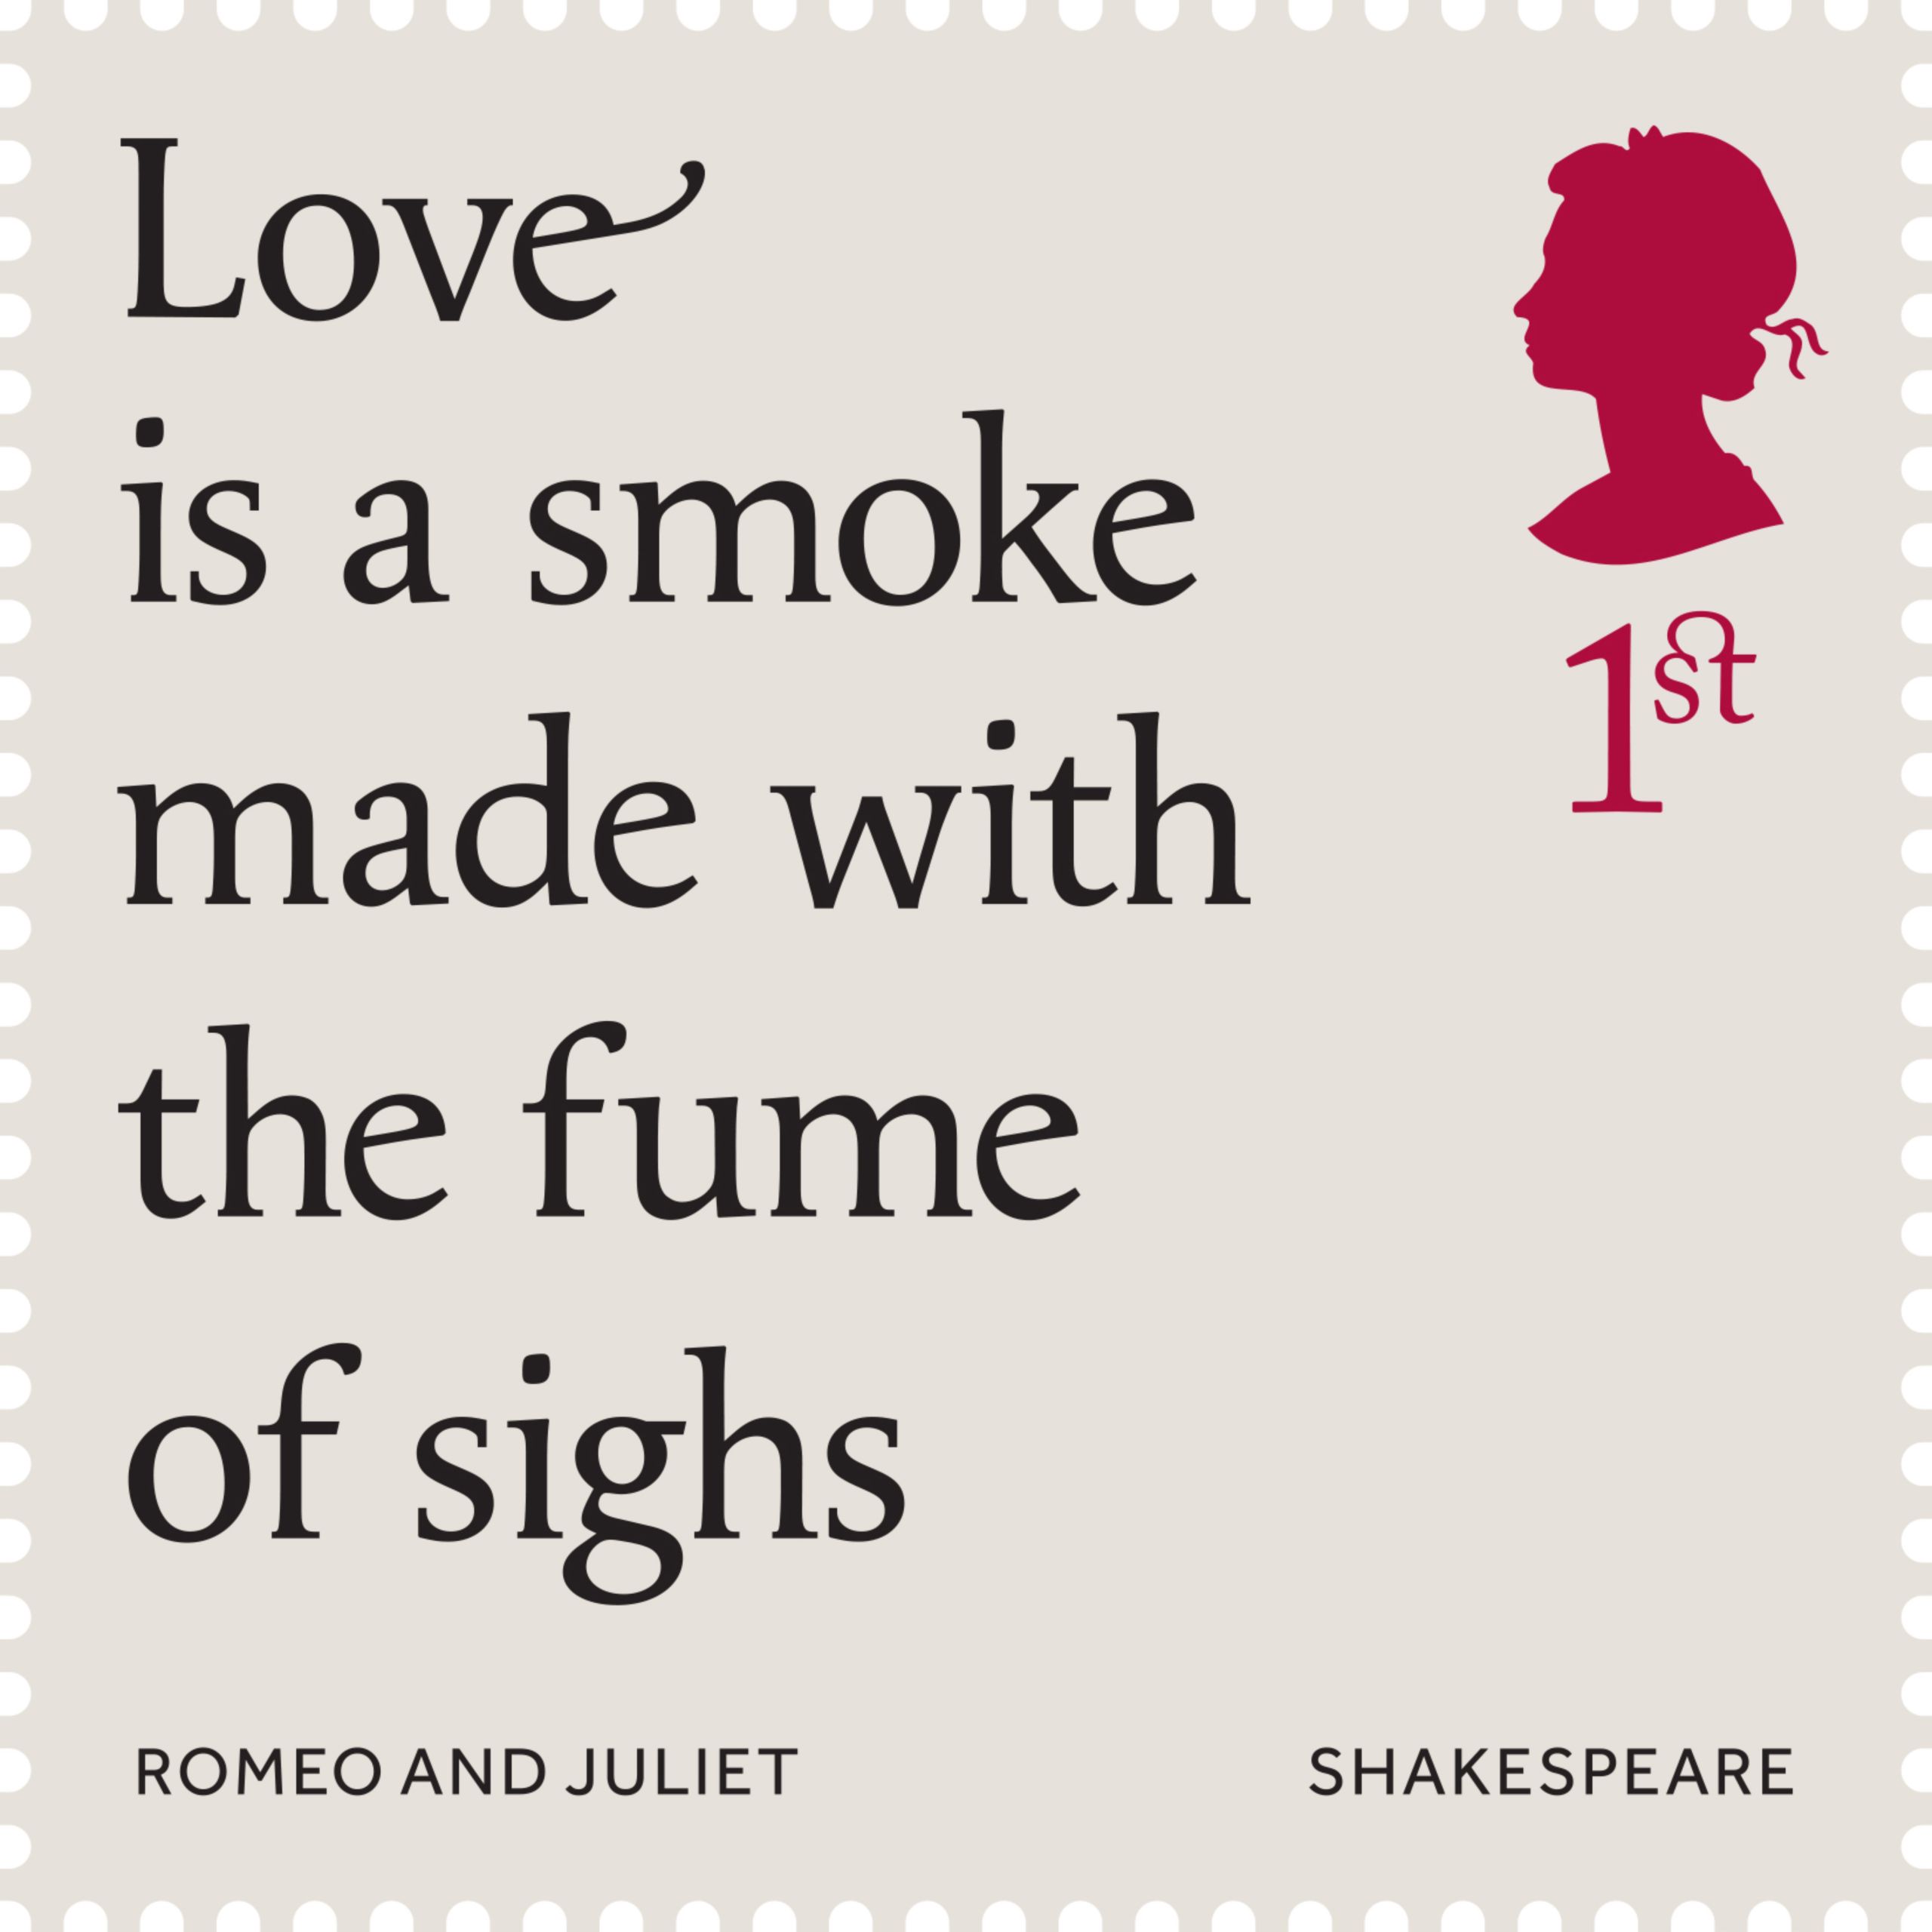 Romeo And Juliet Romantic Quotes
 New Shakespeare stamps feature quotes from The Bard